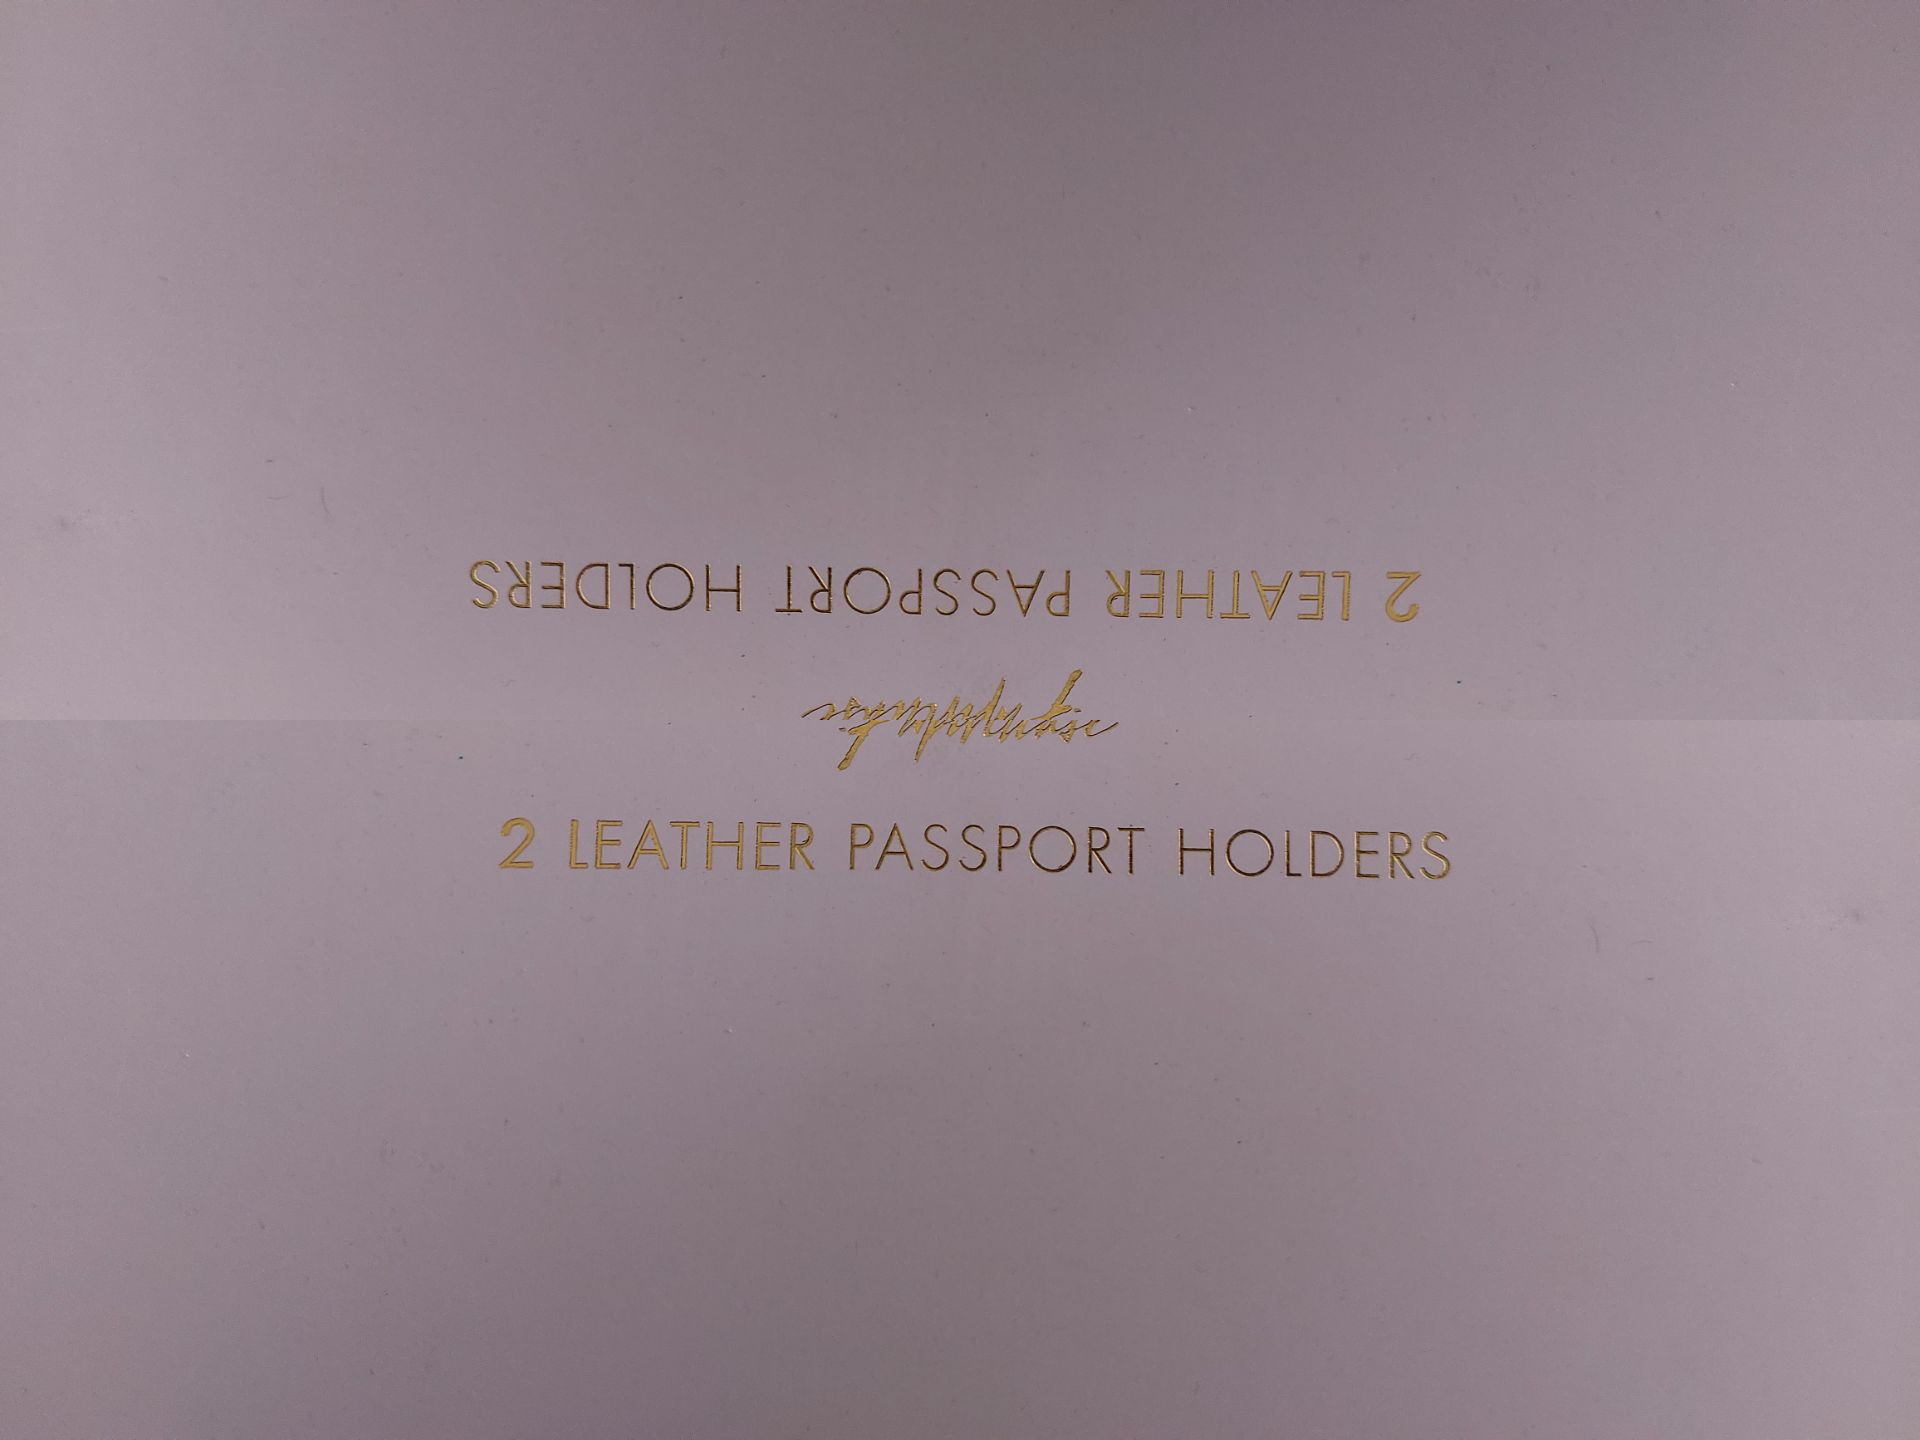 Wedding Passport Covers, 2 Sets of 2 - Image 3 of 7